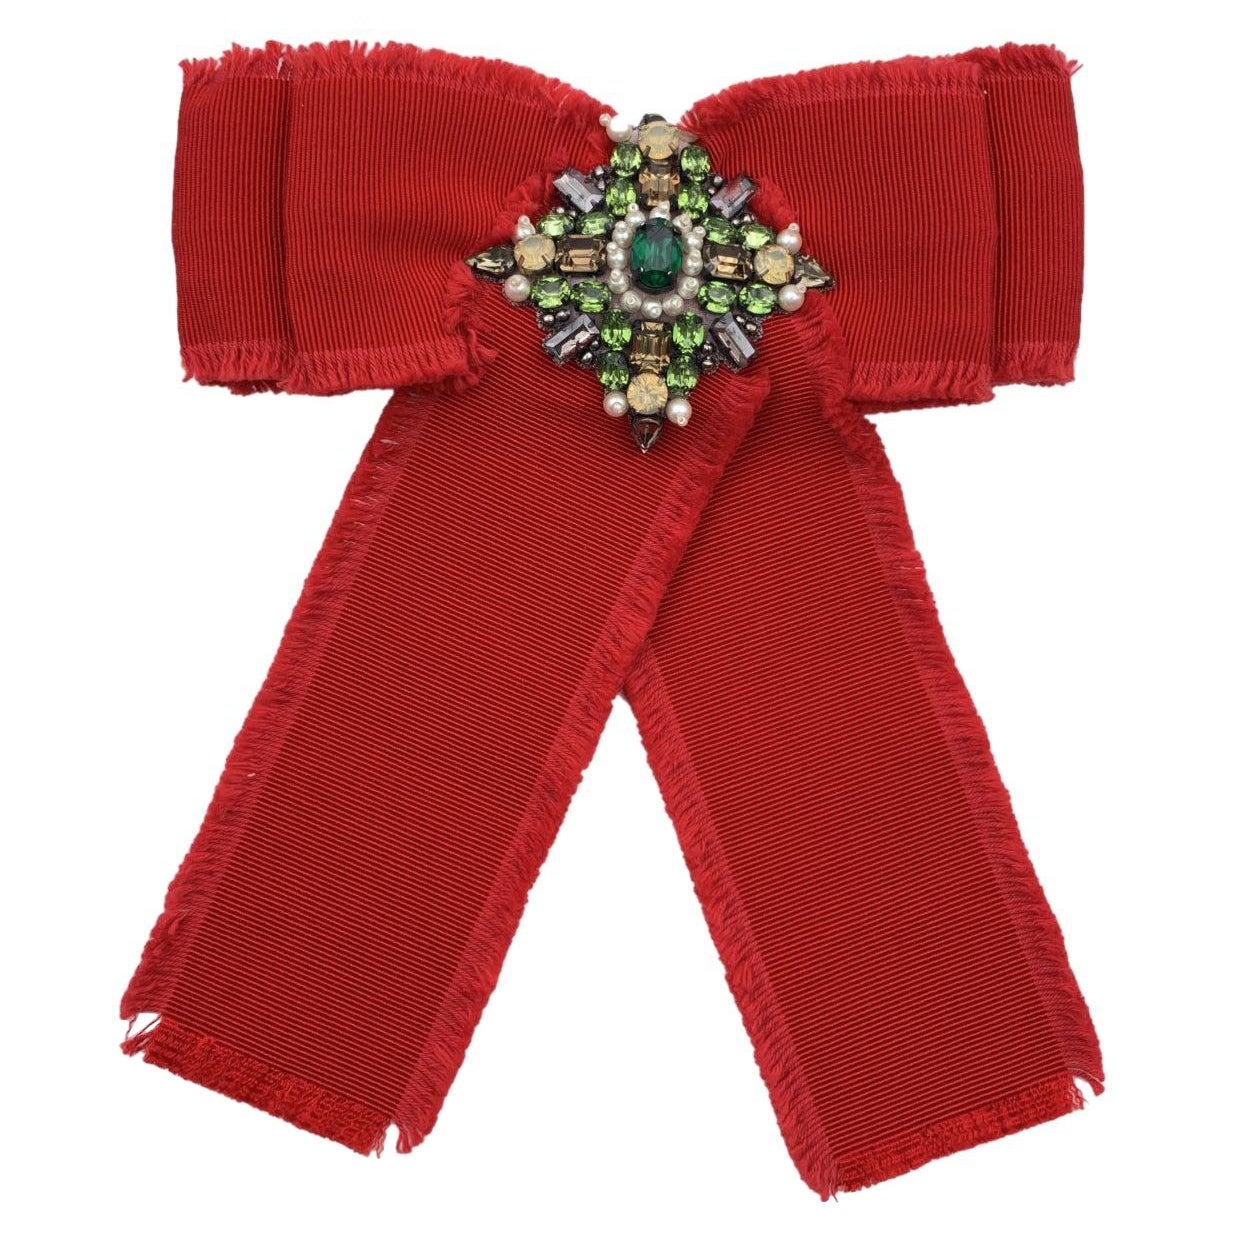 Gucci Red Grosgrain Bow Brooch Pin with Green Crystals